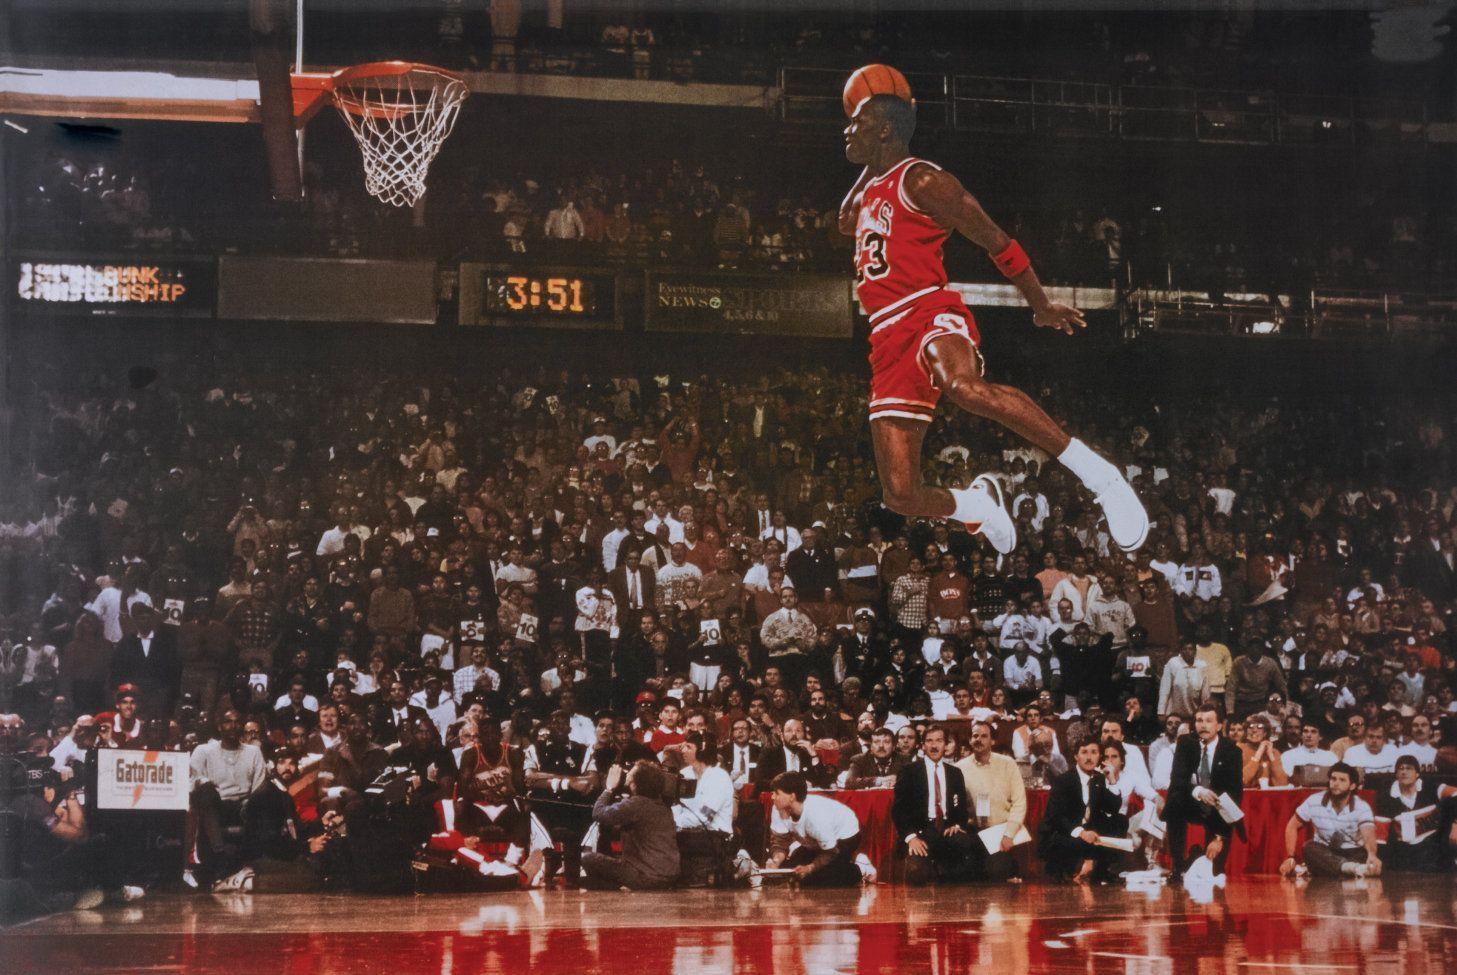 Michael Jordan jumping up to dunk the ball in front of a crowd of people - Michael Jordan